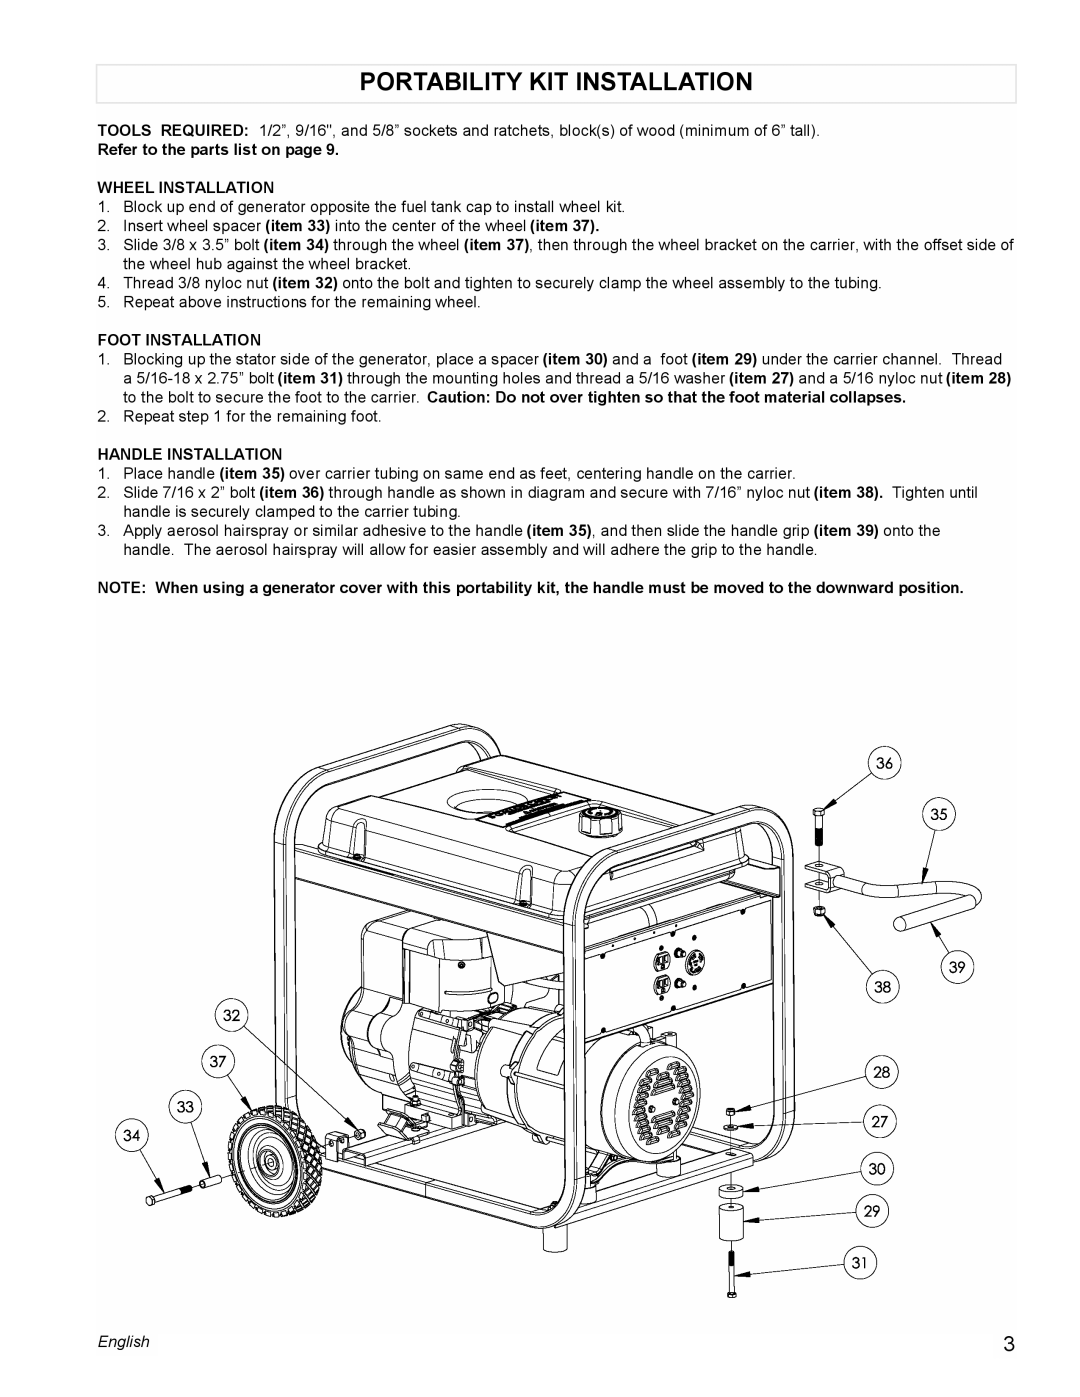 Powermate PM0525303.02 manual Portability Kit Installation, Refer to the parts list on page, Wheel Installation, English 